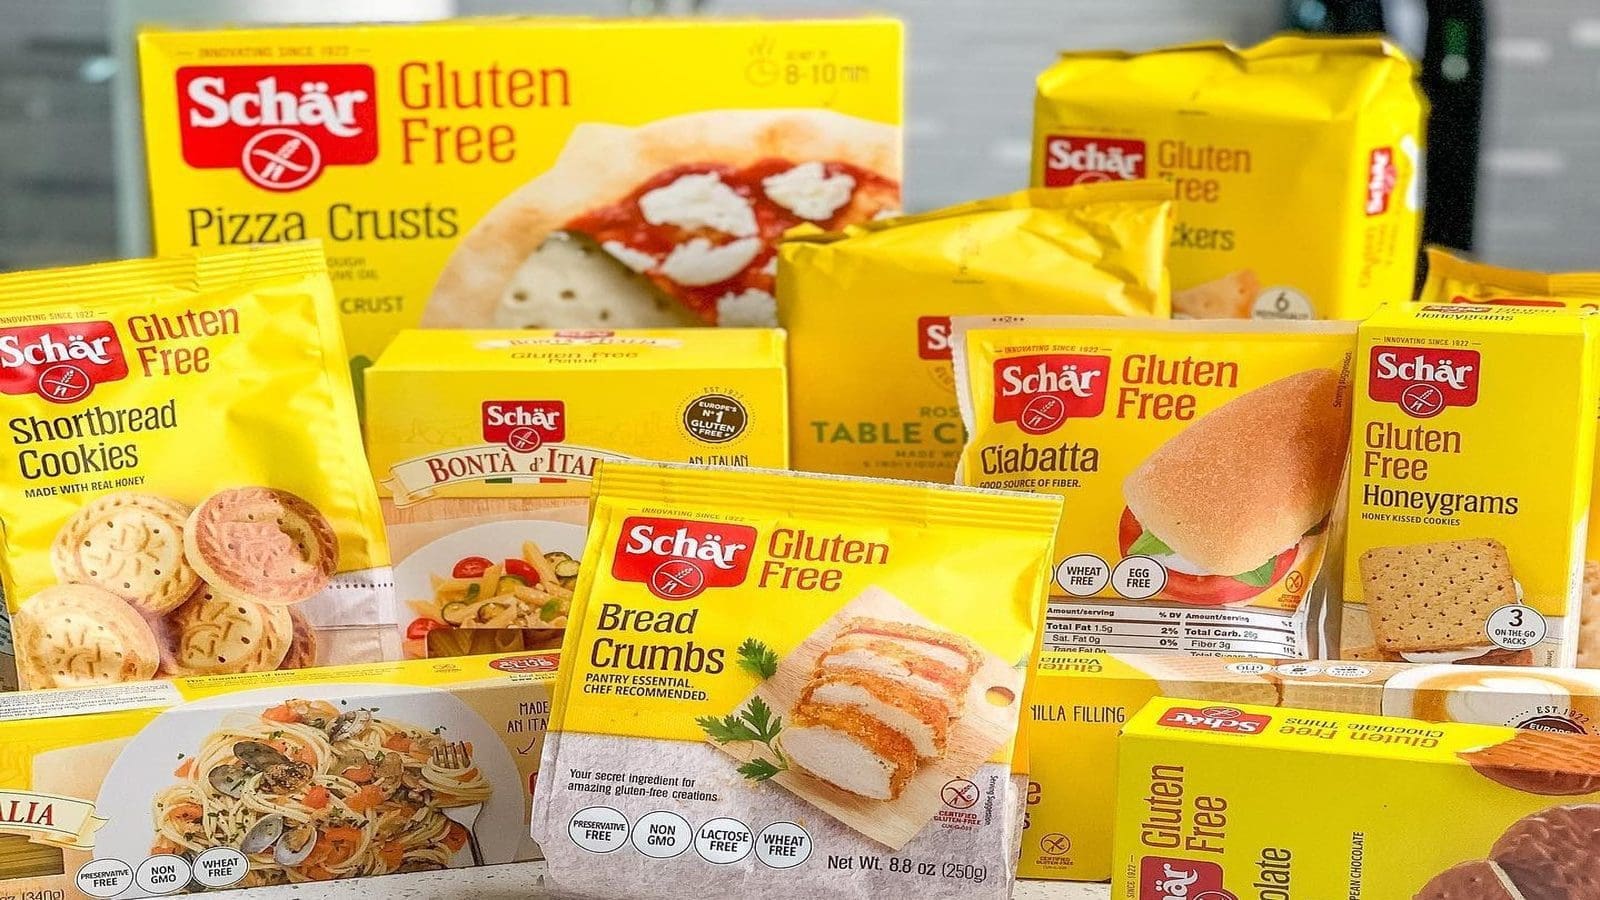 Dr. Schär Spain schemes expanding its gluten-free capacity with a US$7.2M production line